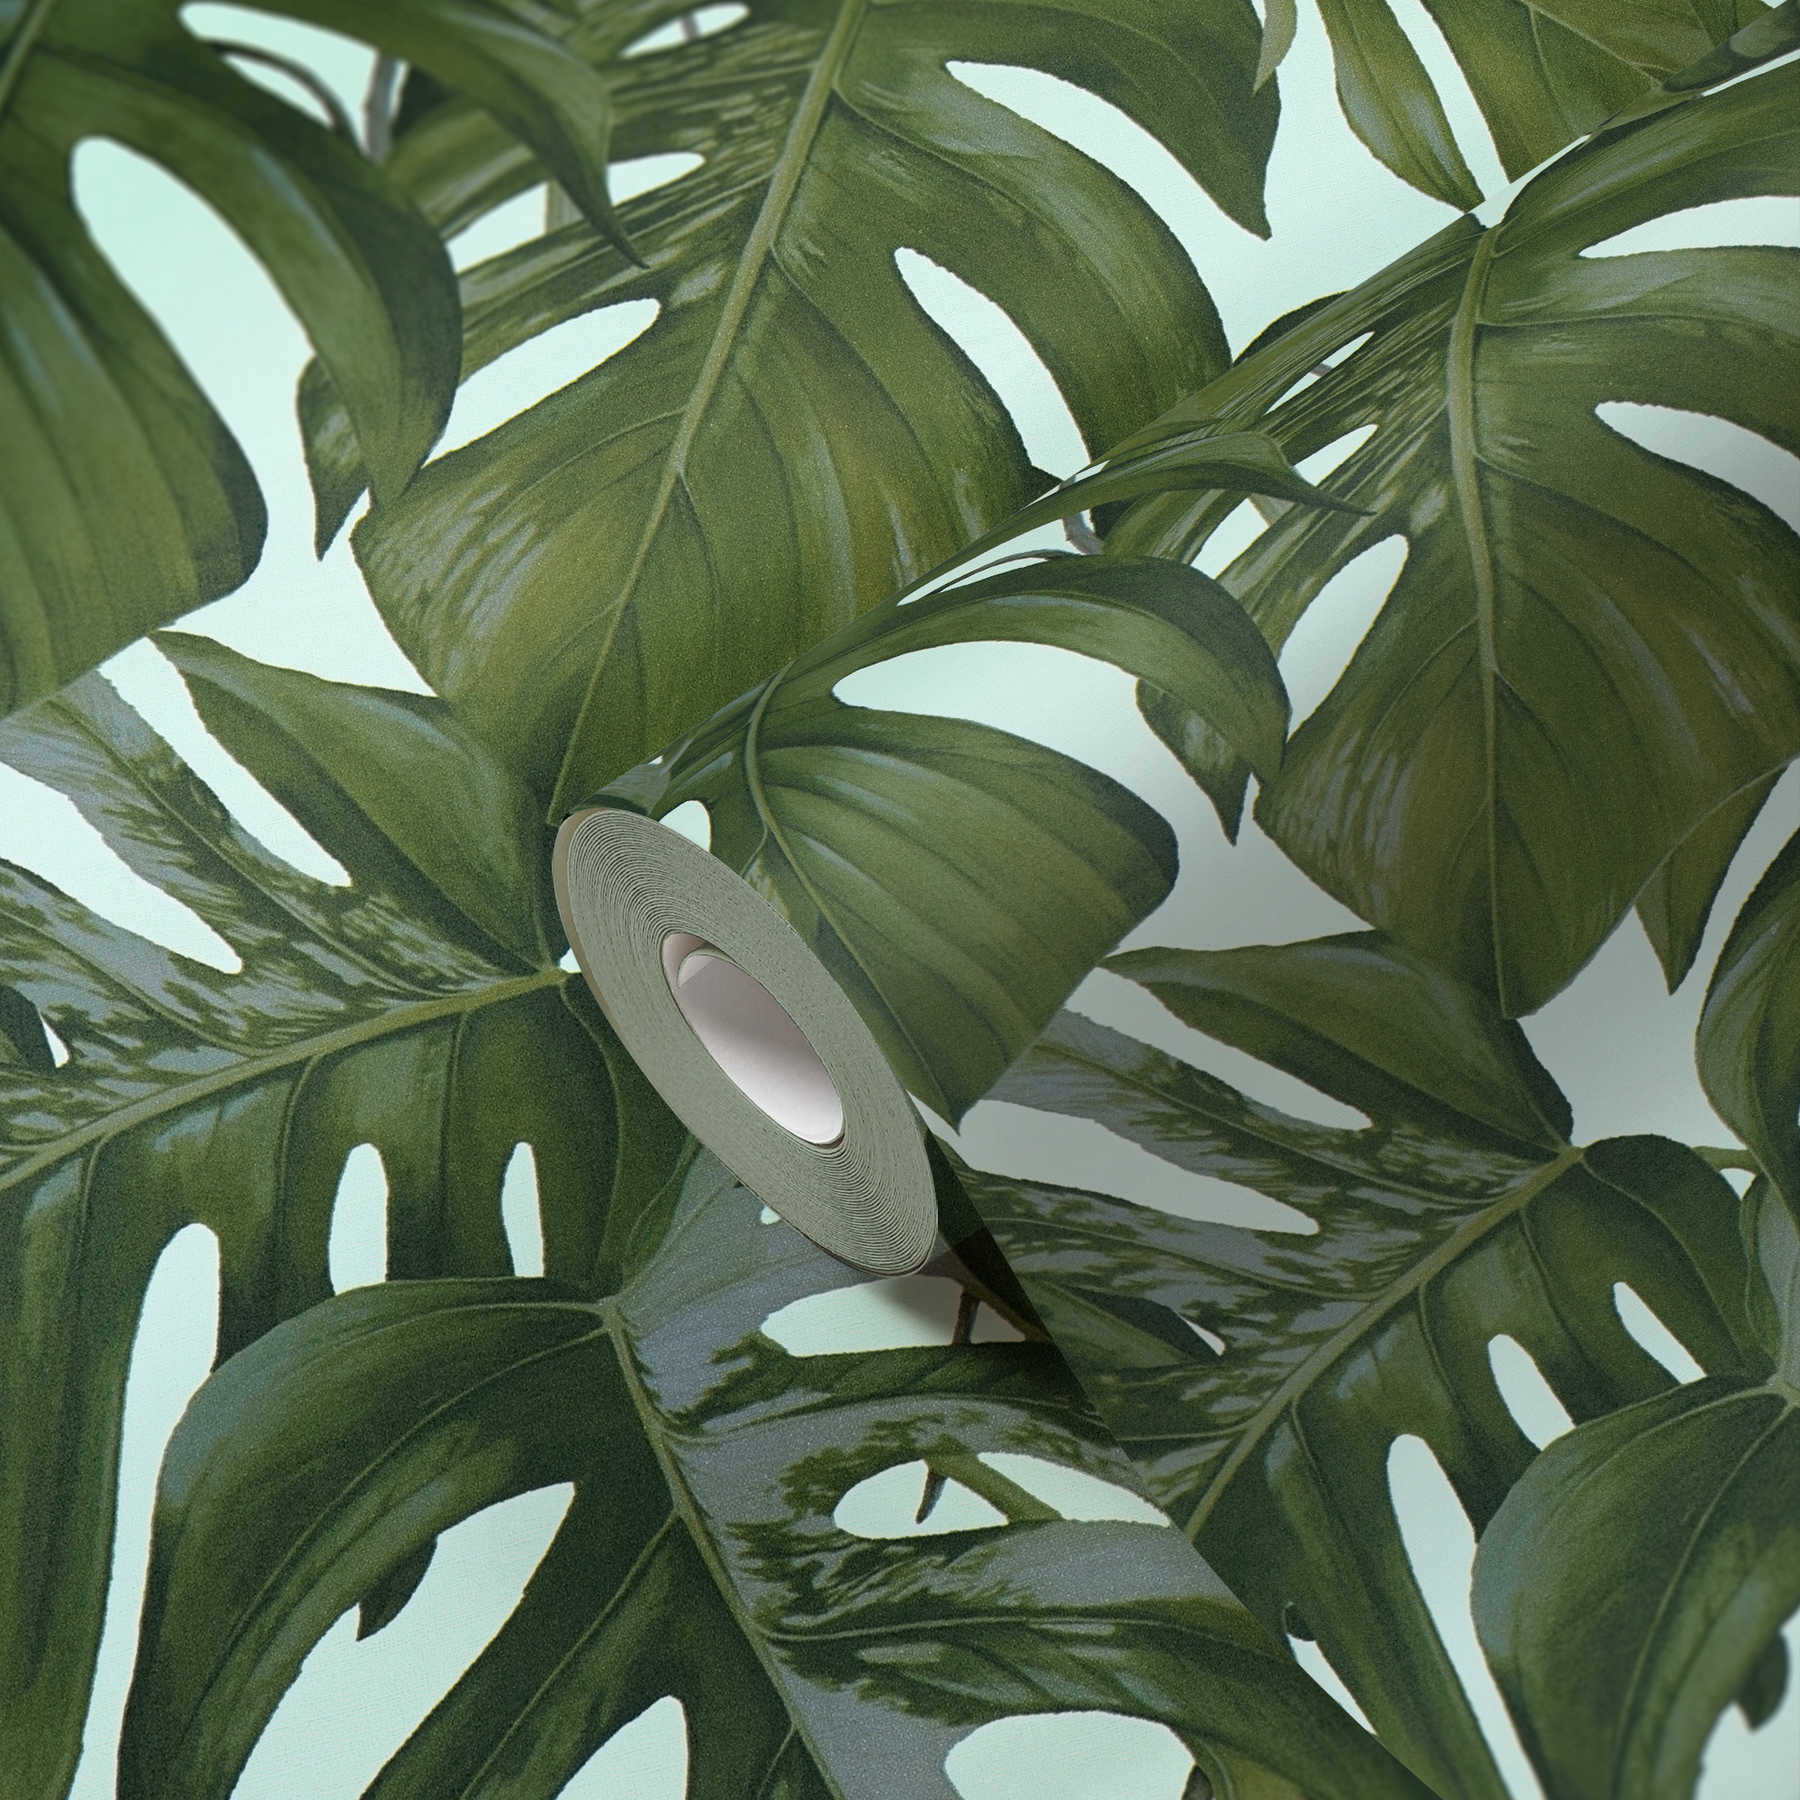             Leaves wallpaper with monstera pattern by MICHALSKY - green
        